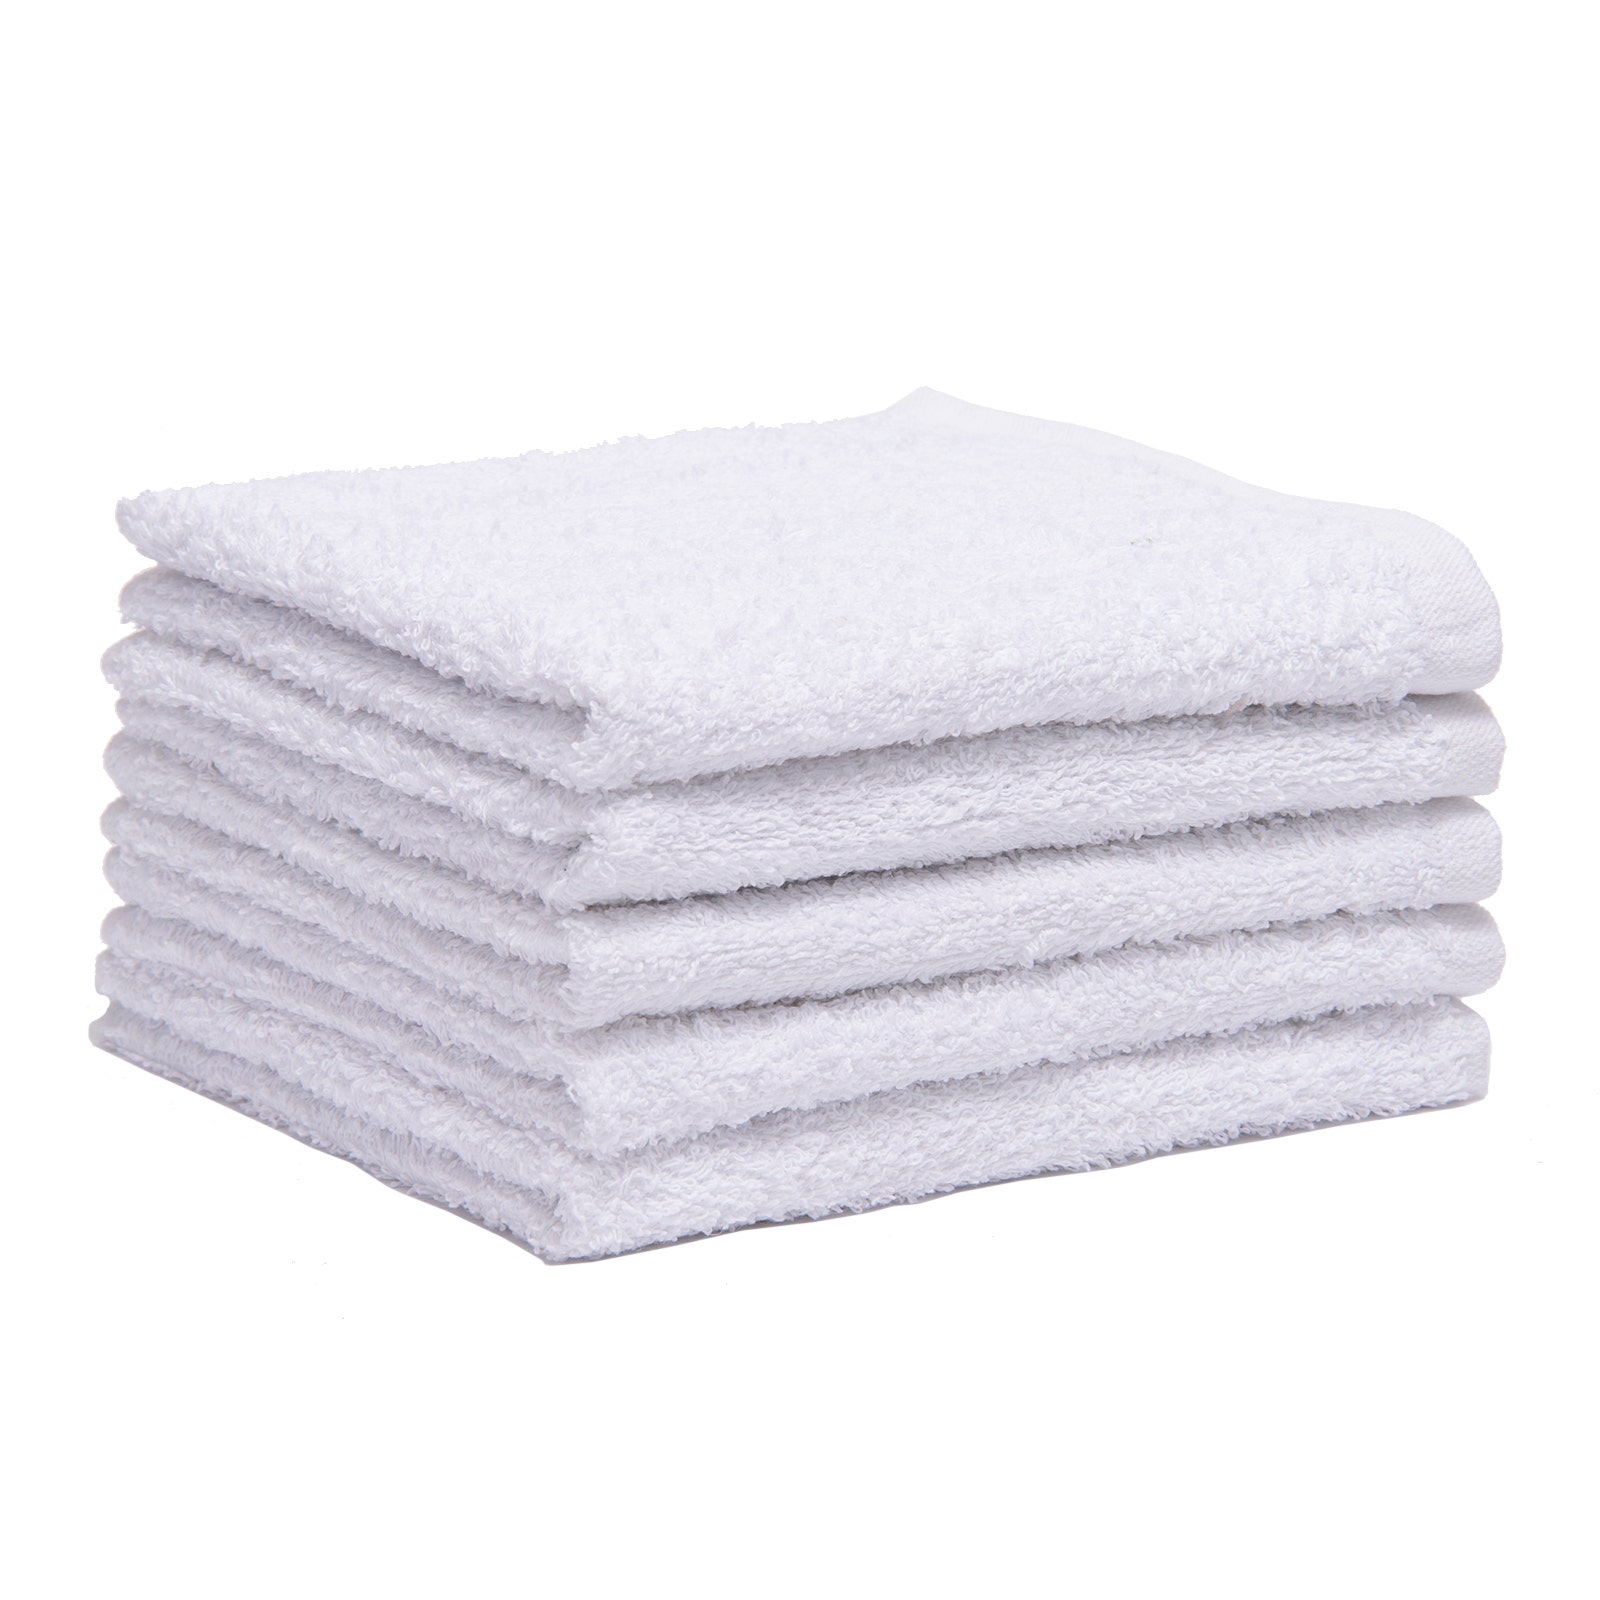 https://www.snsnails.com/media/catalog/product/B/a/Bar-Towels-Heavyweight-Cotton-Terry-14x16-White.jpg?optimize=medium&bg-color=255,255,255&fit=bounds&height=&width=&canvas=: